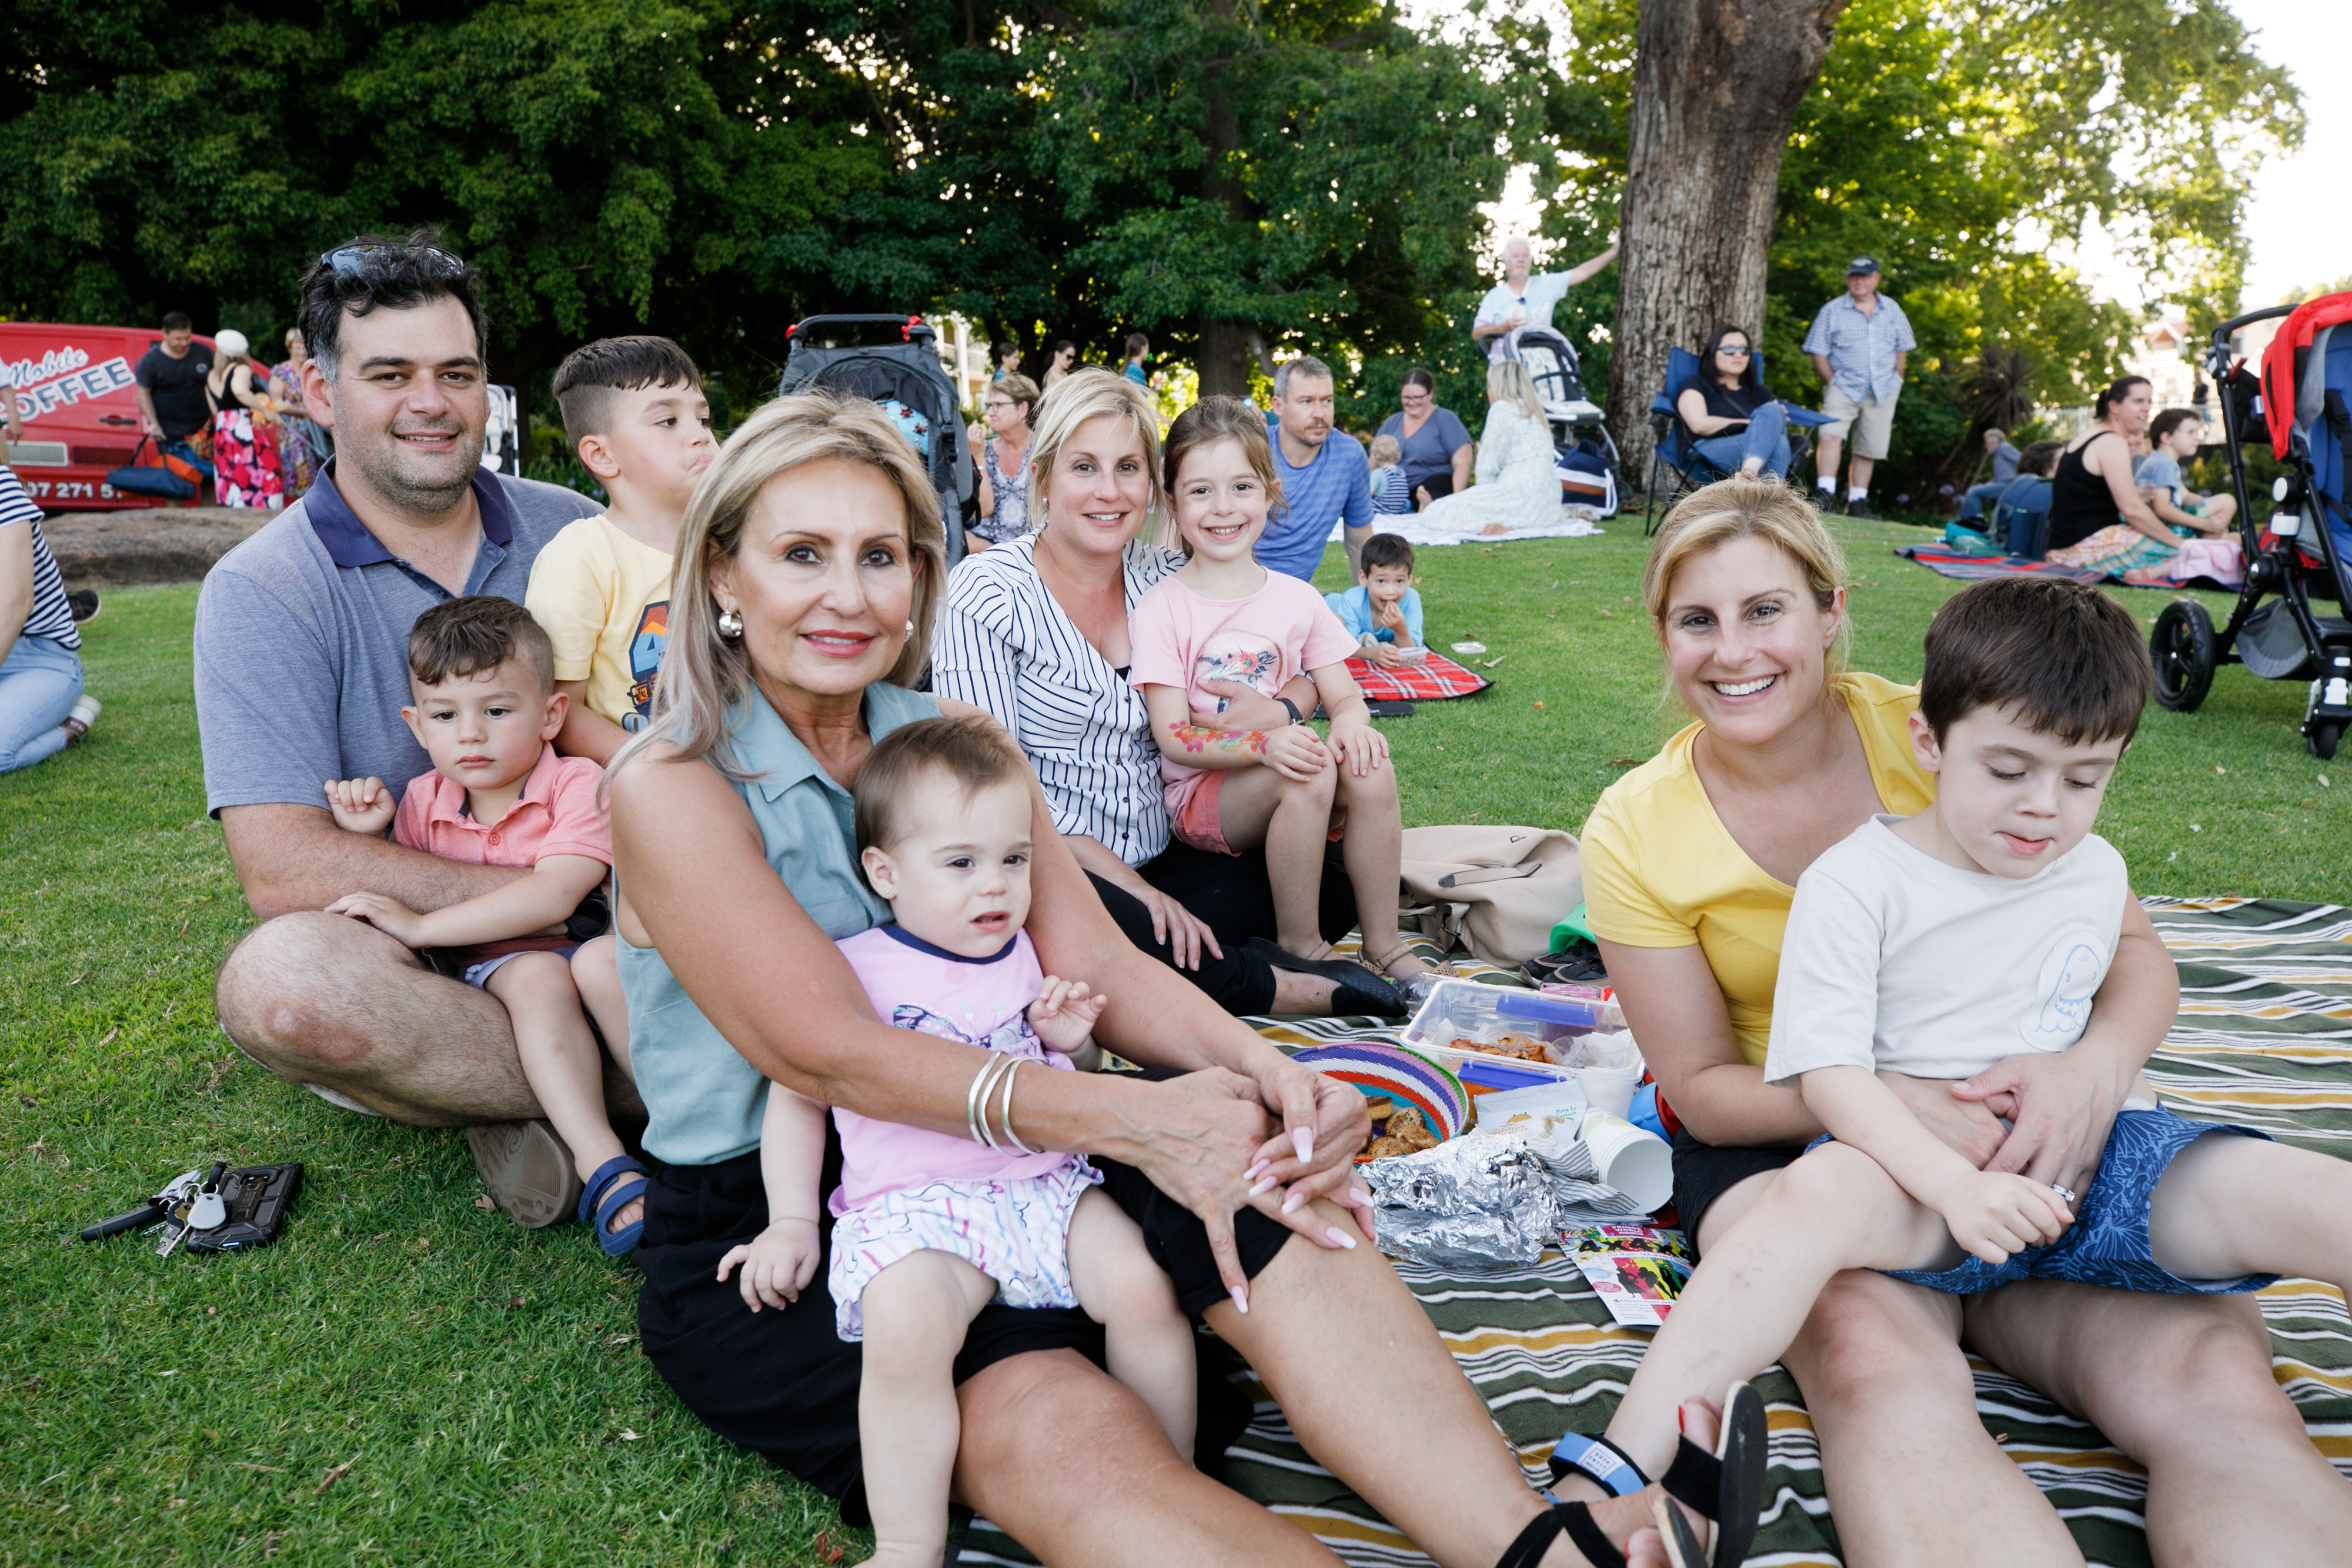 families enjoying a picnic on the grass